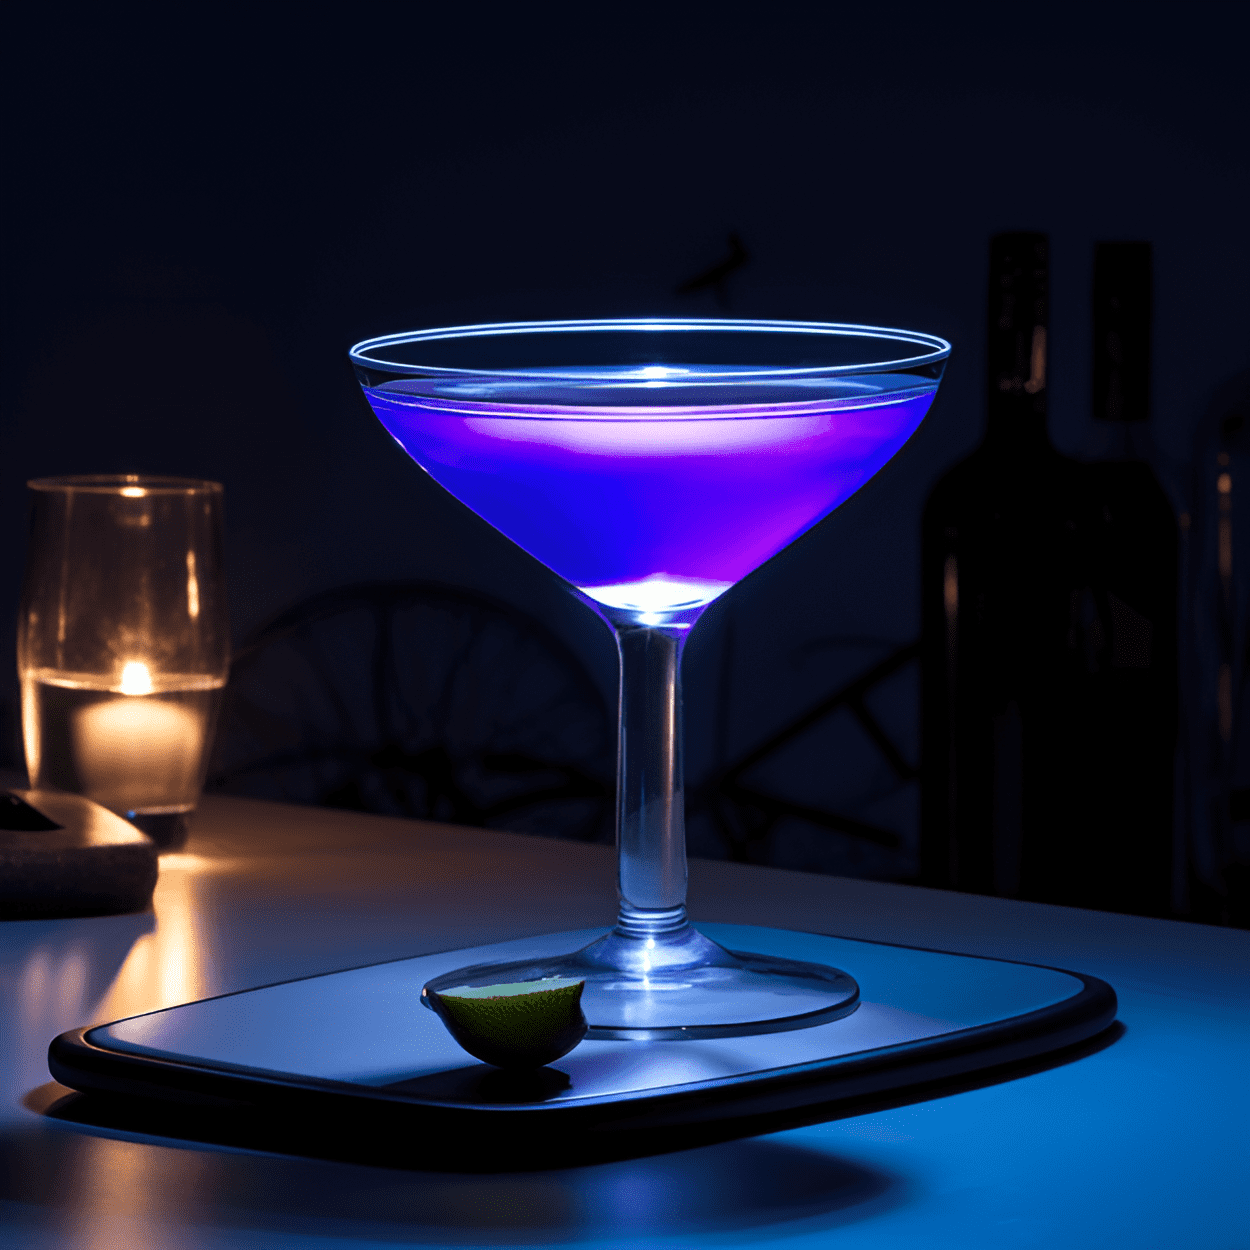 Deviation Cocktail Recipe - The Deviation cocktail is a complex blend of flavors. It's slightly sweet, with a hint of sourness from the lemon juice. The gin provides a strong, juniper-forward base, while the maraschino liqueur adds a touch of sweetness. The crème de violette gives it a floral note, making it a well-rounded and balanced cocktail.